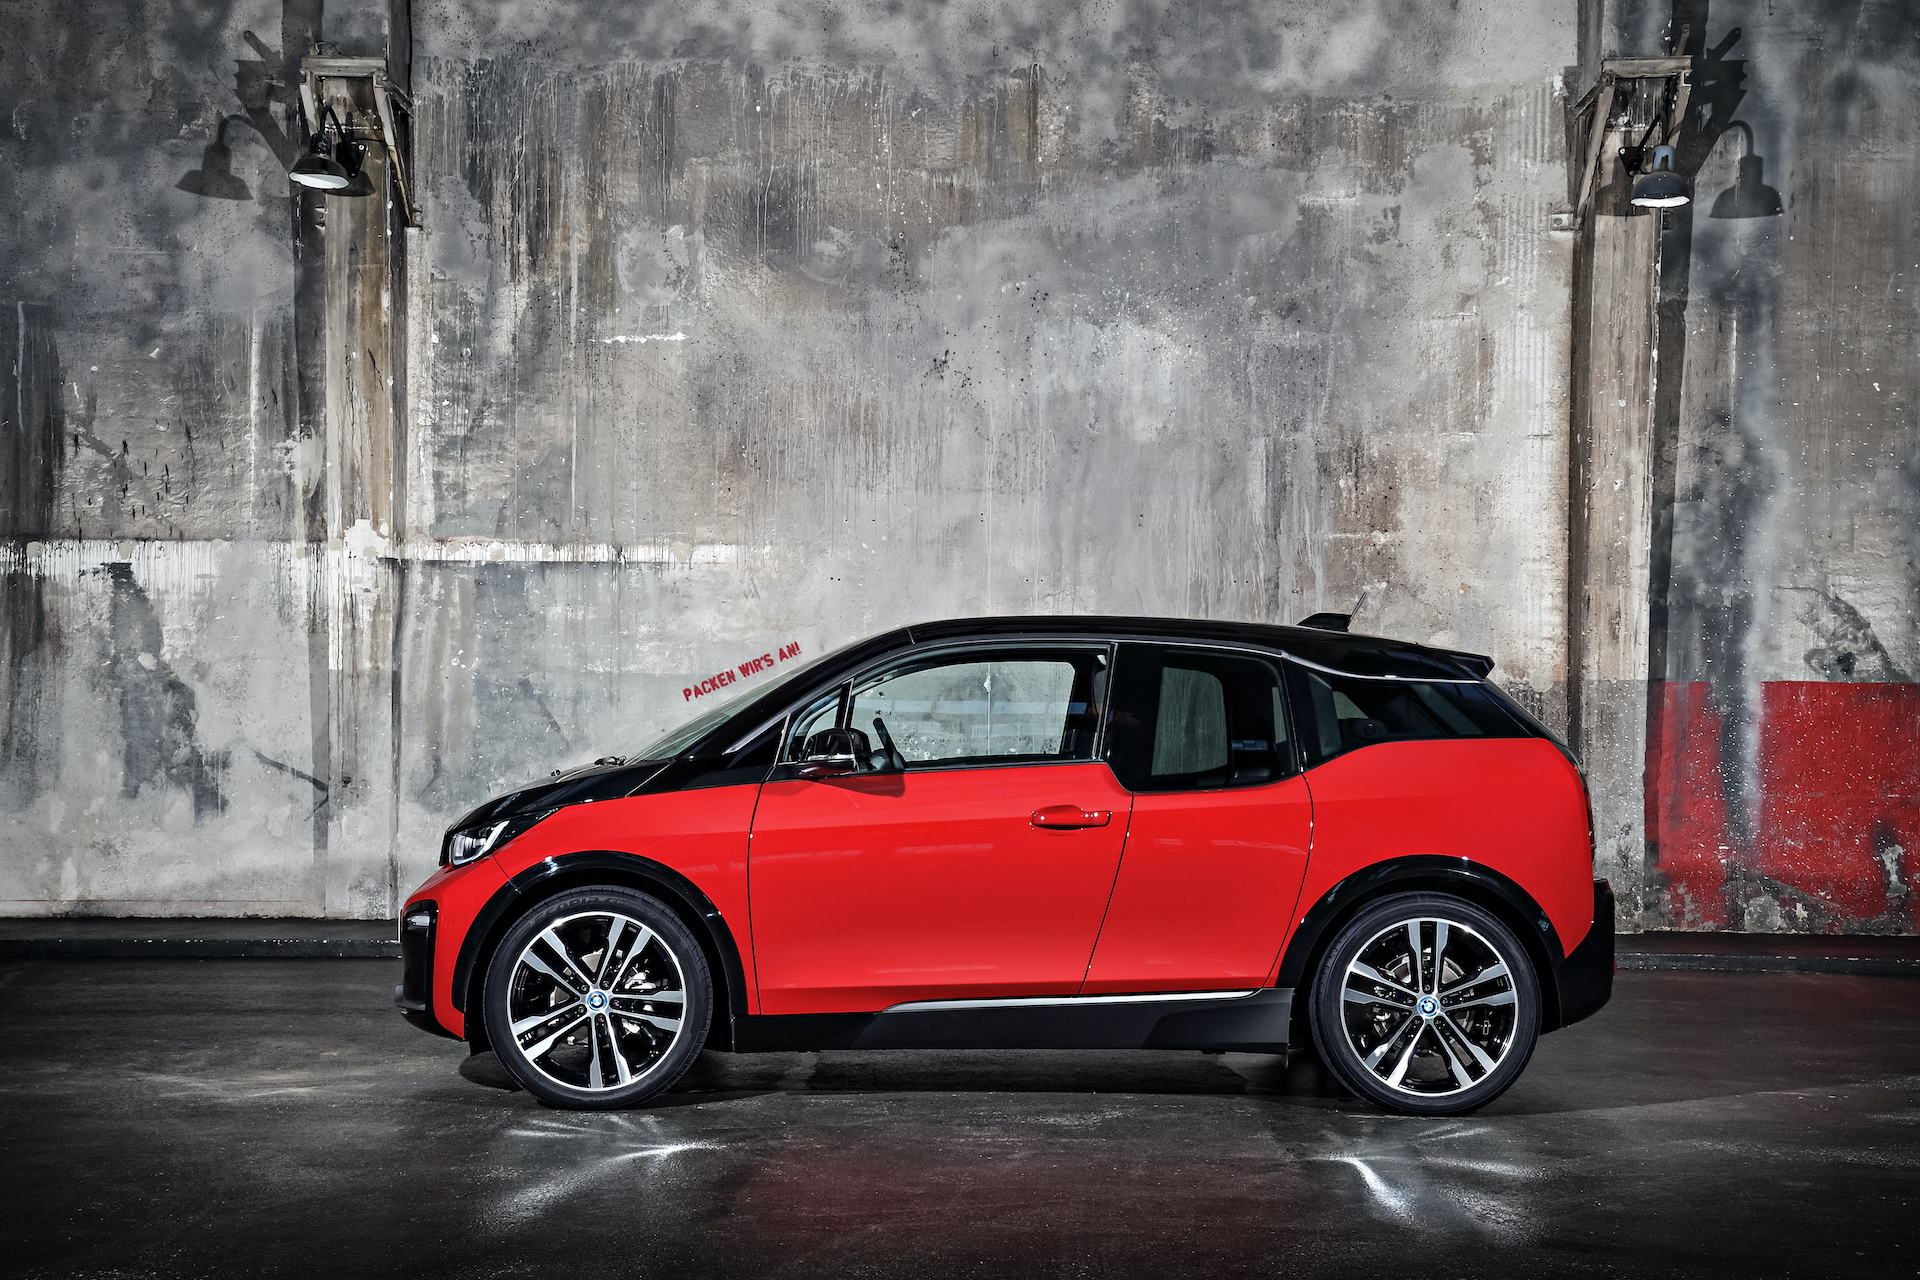 2020 BMW i3 Review: Prices, Specs, and Photos - The Car Connection